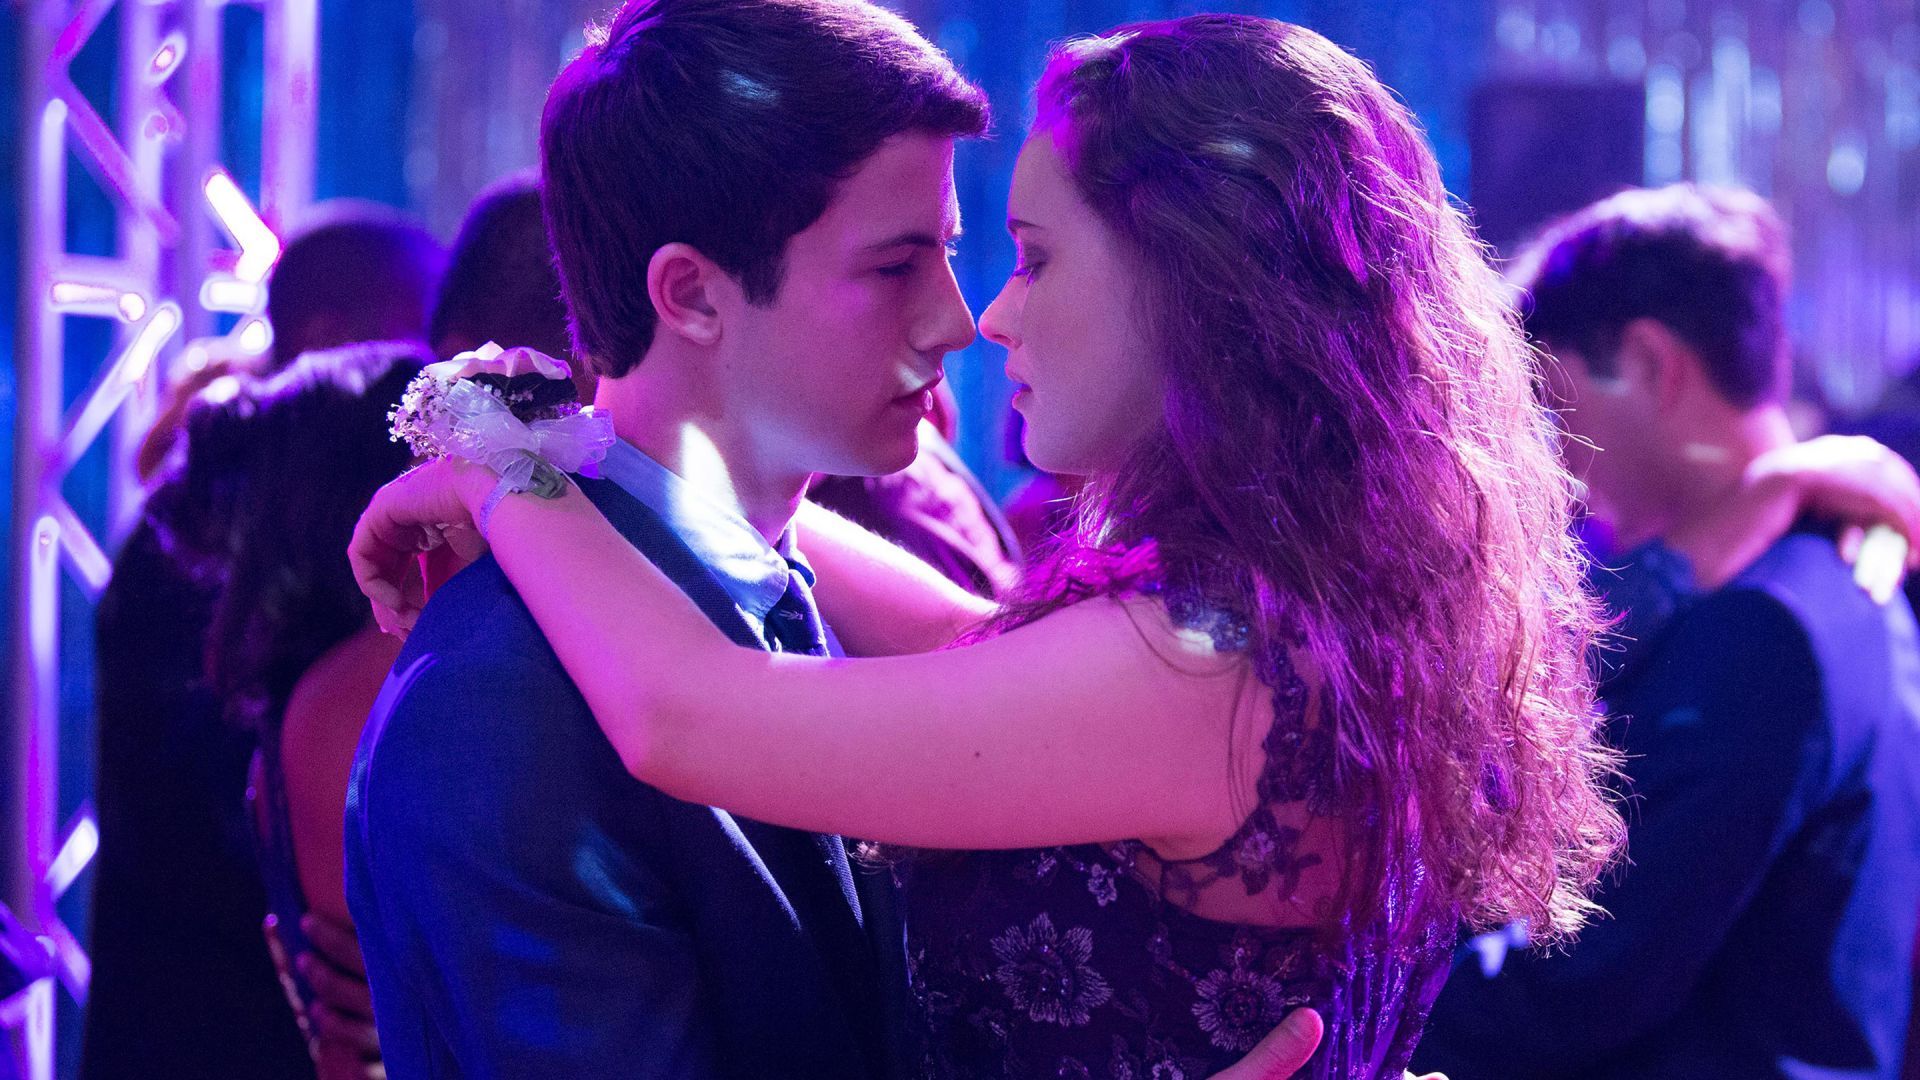 Desktop wallpaper tv show, 13 reasons why, prom, dance, HD image, picture, background, 635174